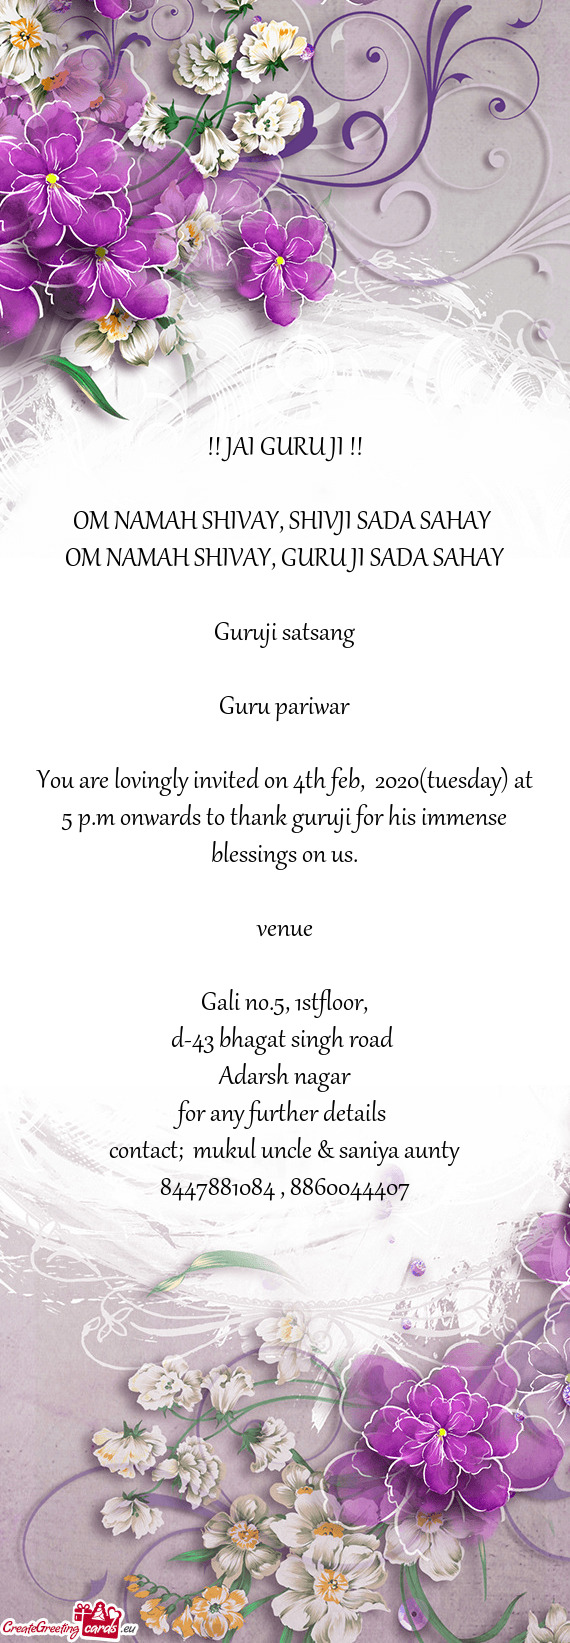 You are lovingly invited on 4th feb, 2020(tuesday) at 5 p.m onwards to thank guruji for his immense